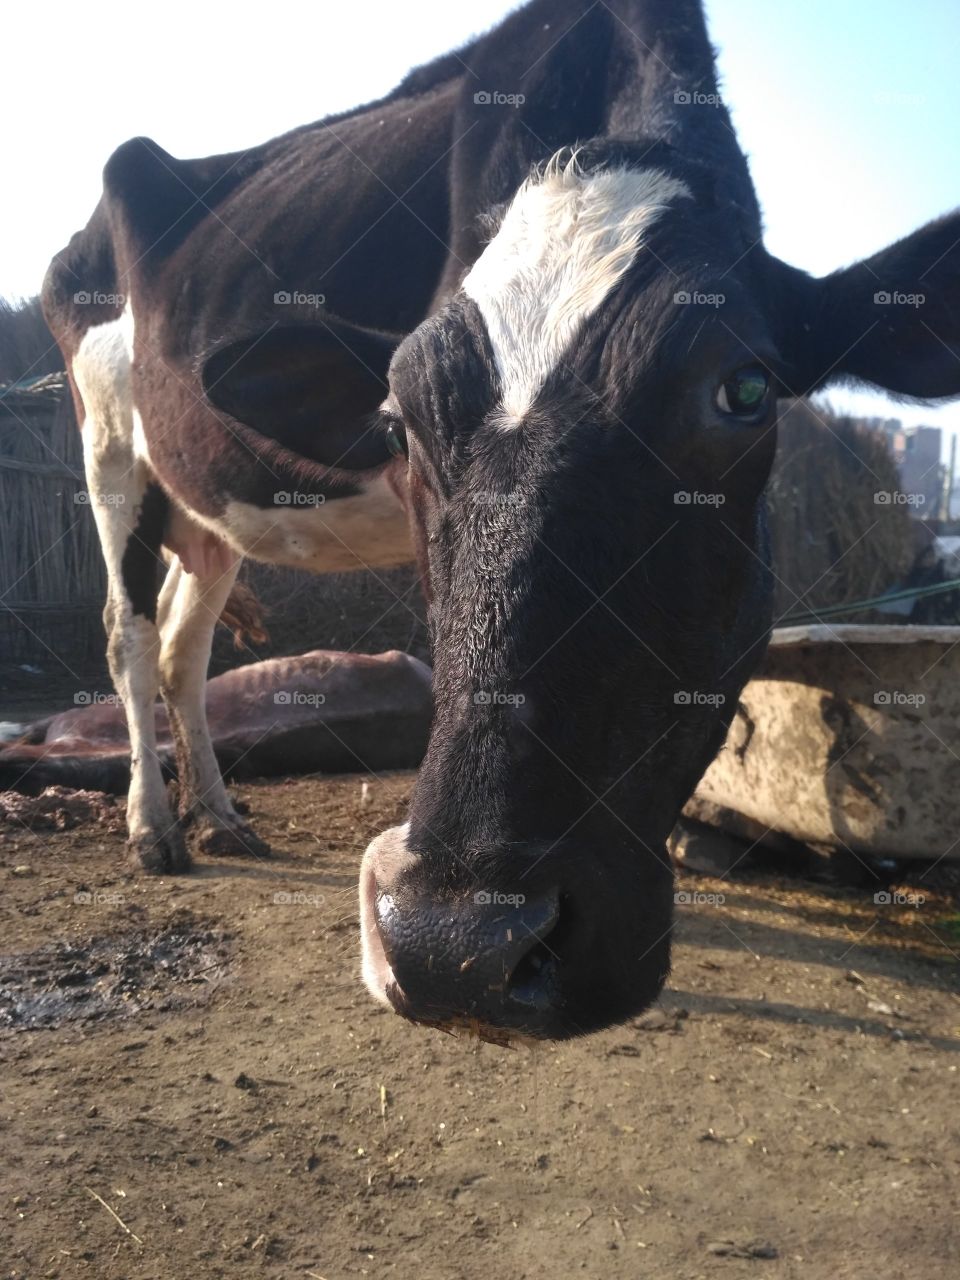 This is cow.